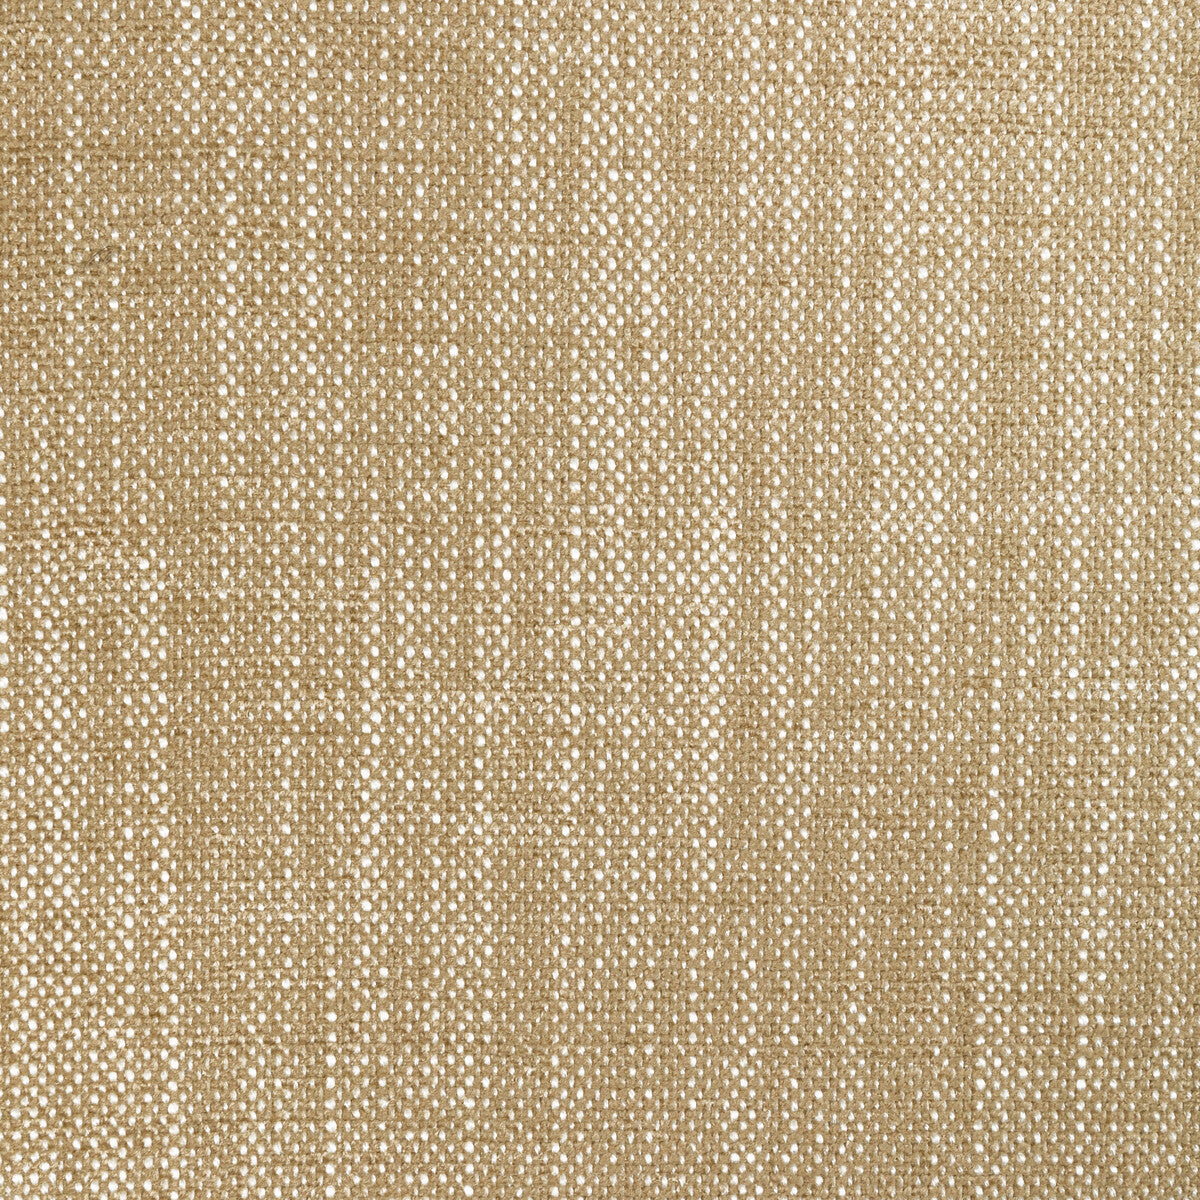 Kravet Design fabric in 36408-1616 color - pattern 36408.1616.0 - by Kravet Design in the Performance Crypton Home collection